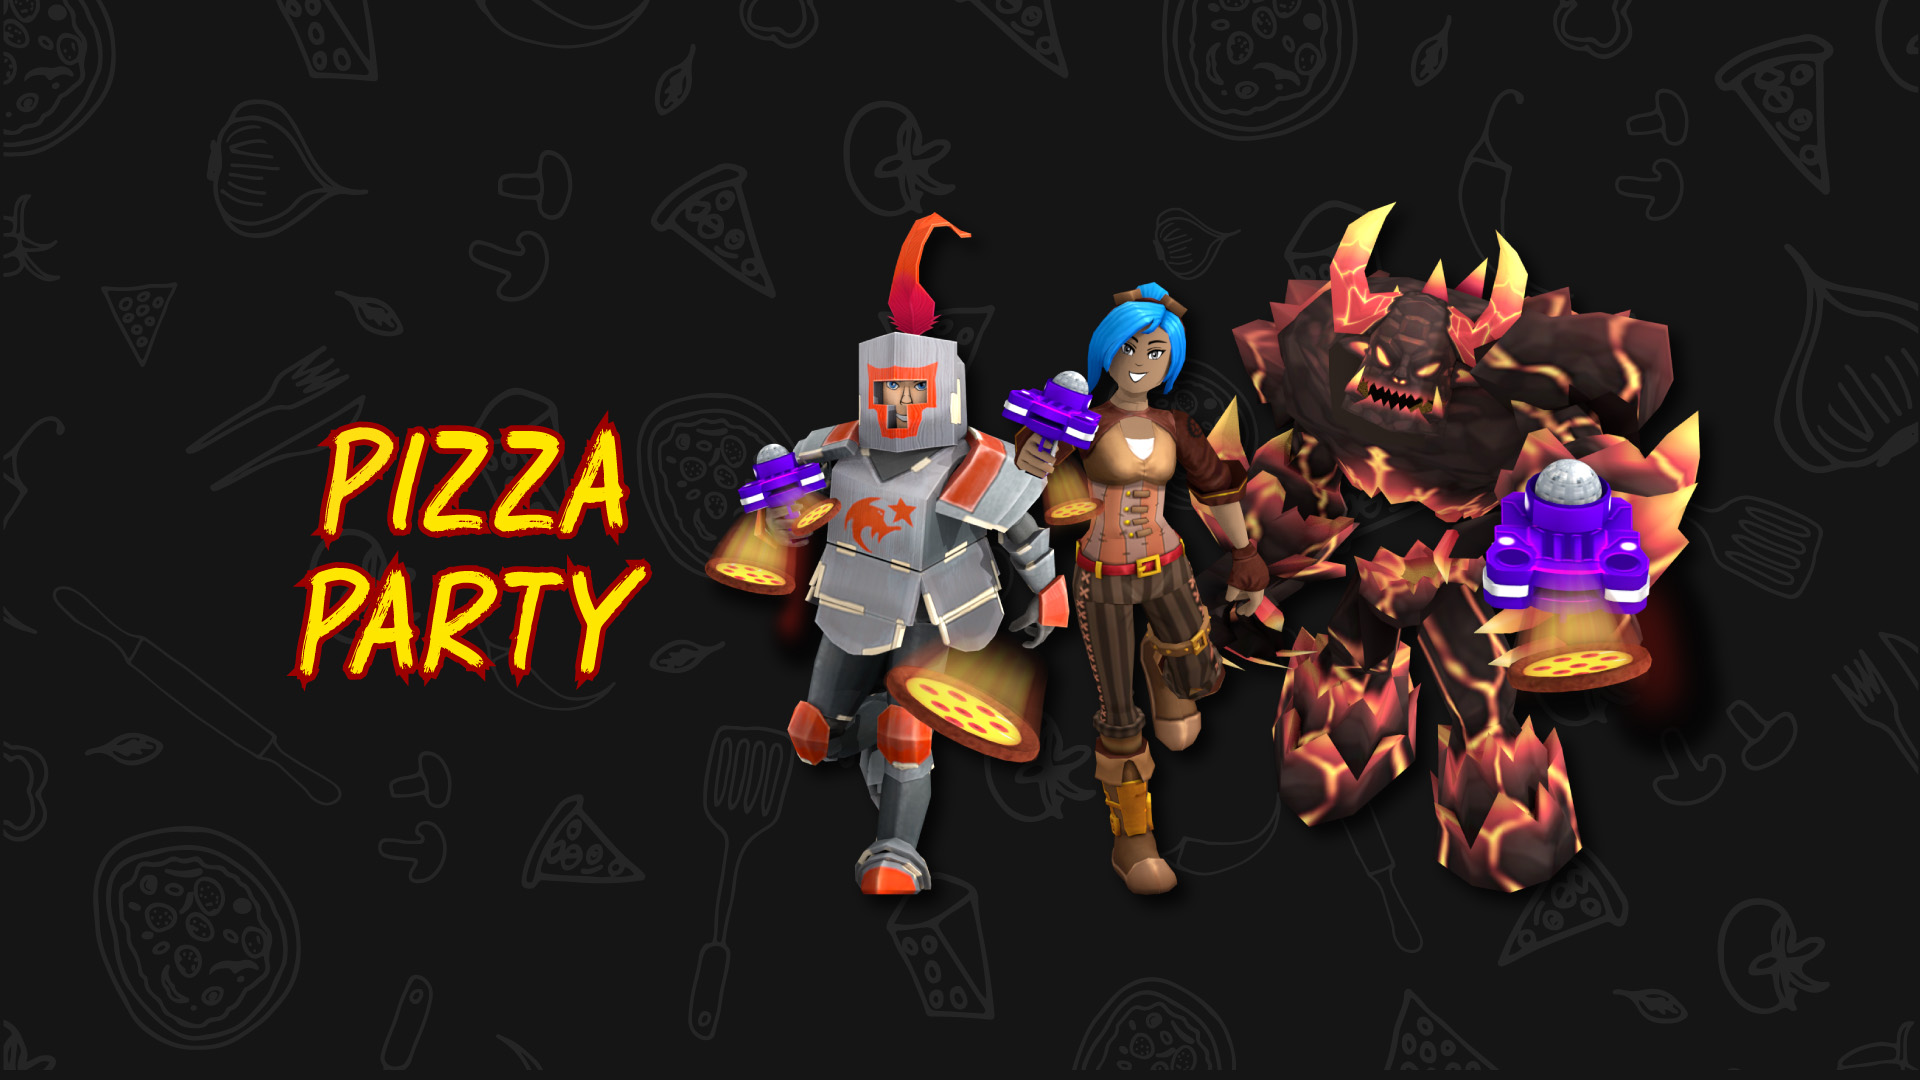 Pizza Party Event Work At A Pizza Place Wiki Fandom - roblox pizza place secrets 2019